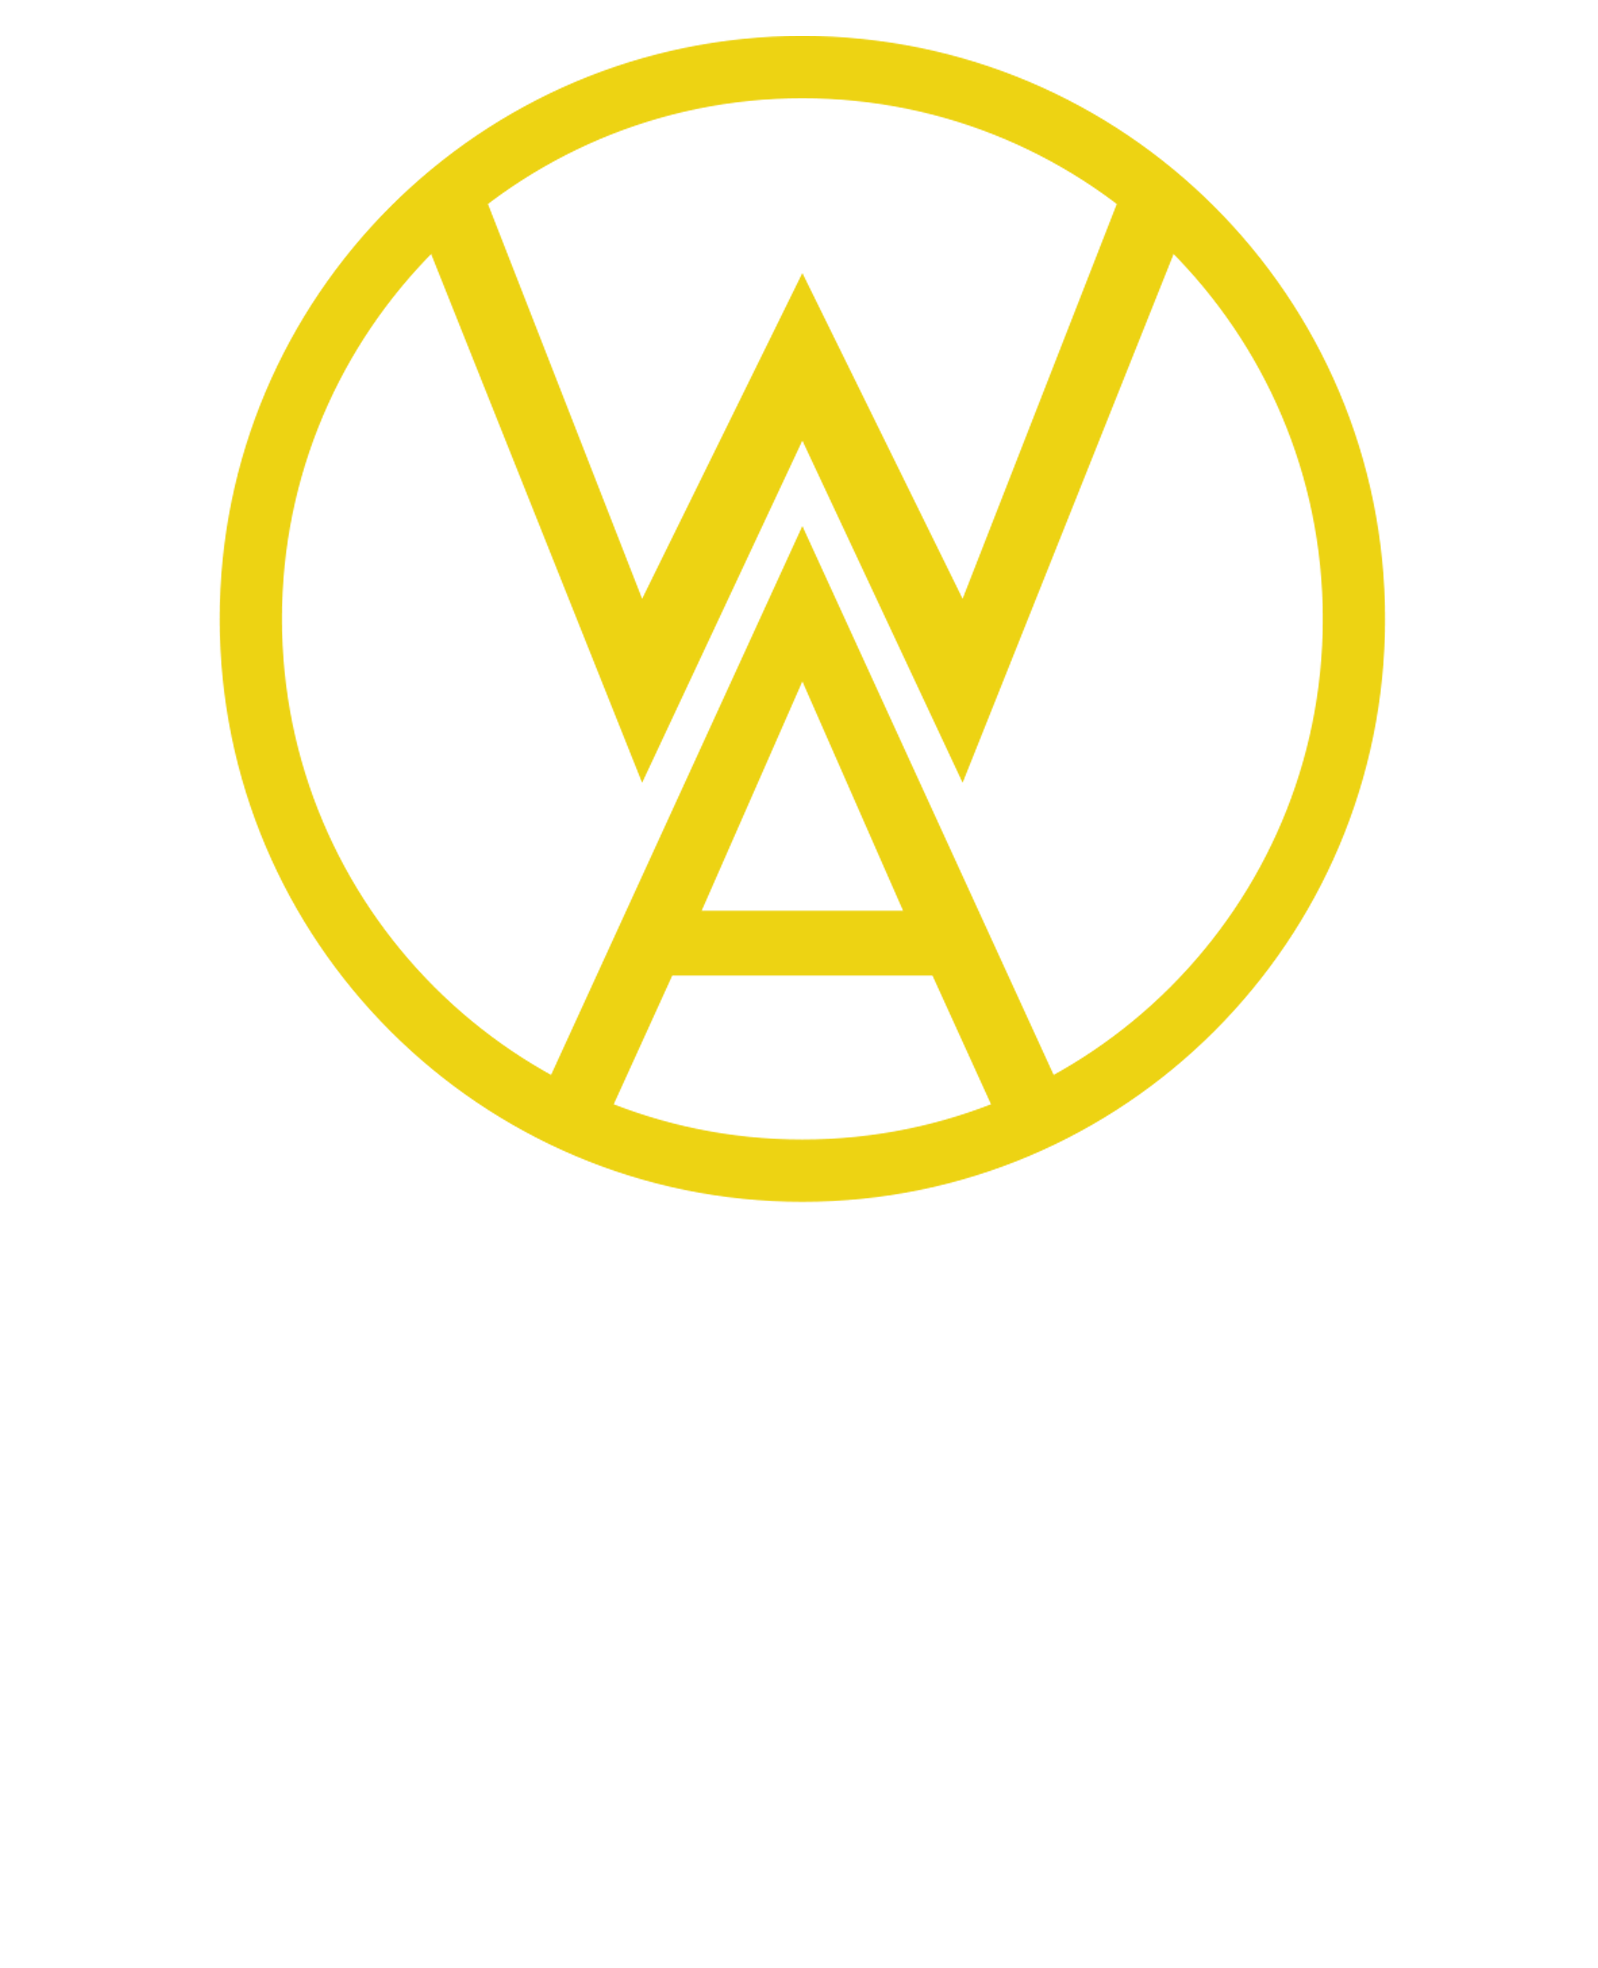 We Are One Project.